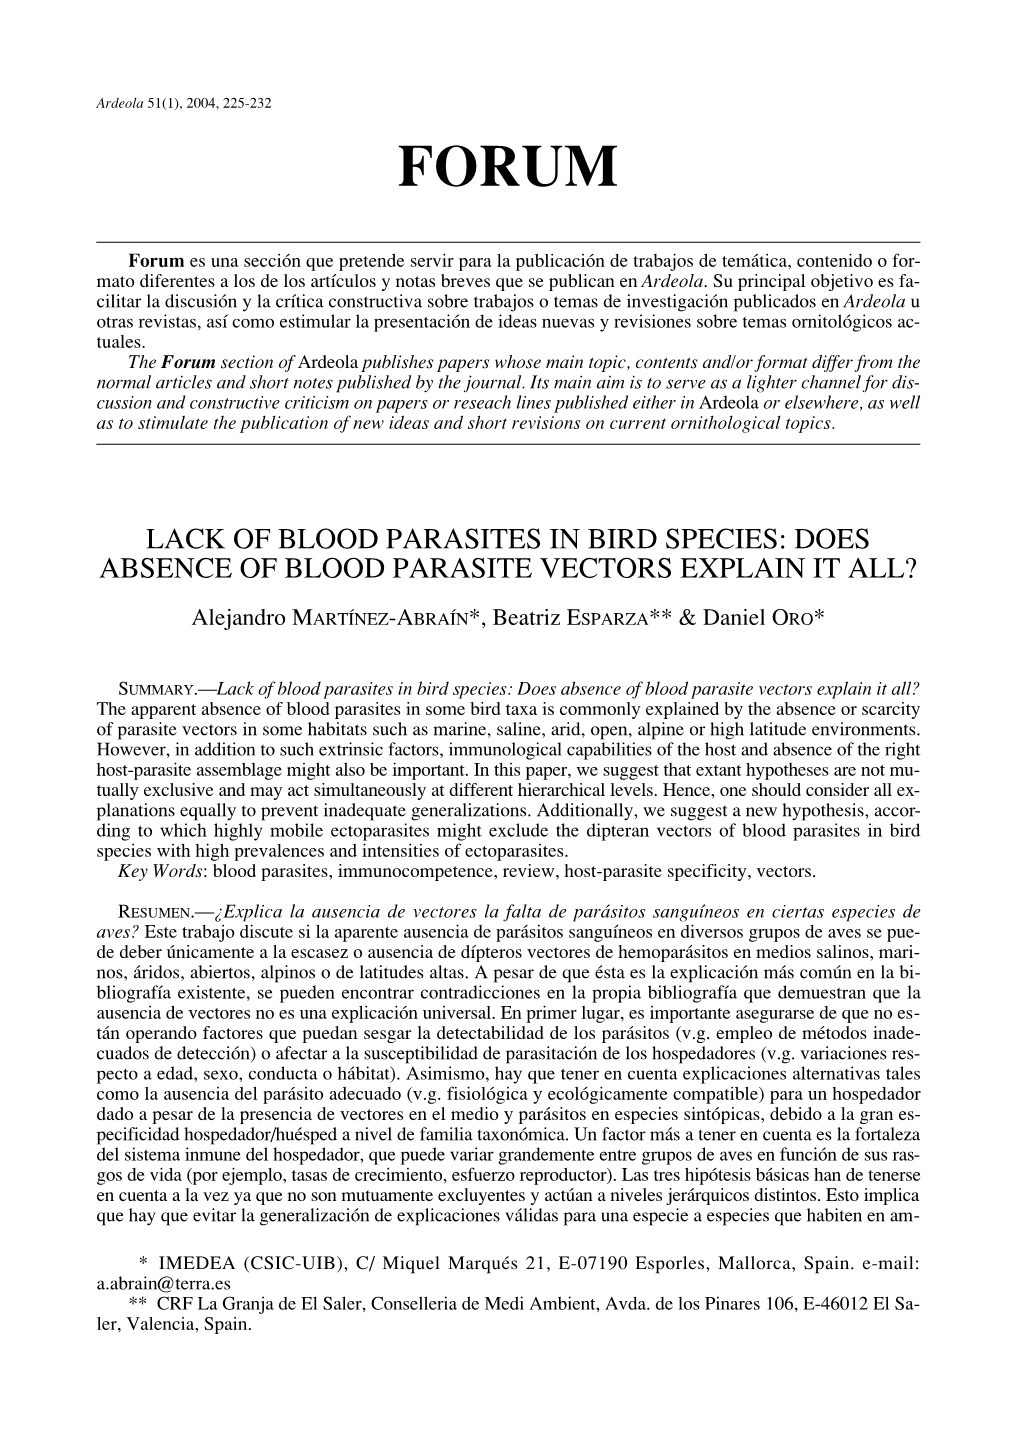 Lack of Blood Parasites in Bird Species: Does Absence of Blood Parasite Vectors Explain It All?